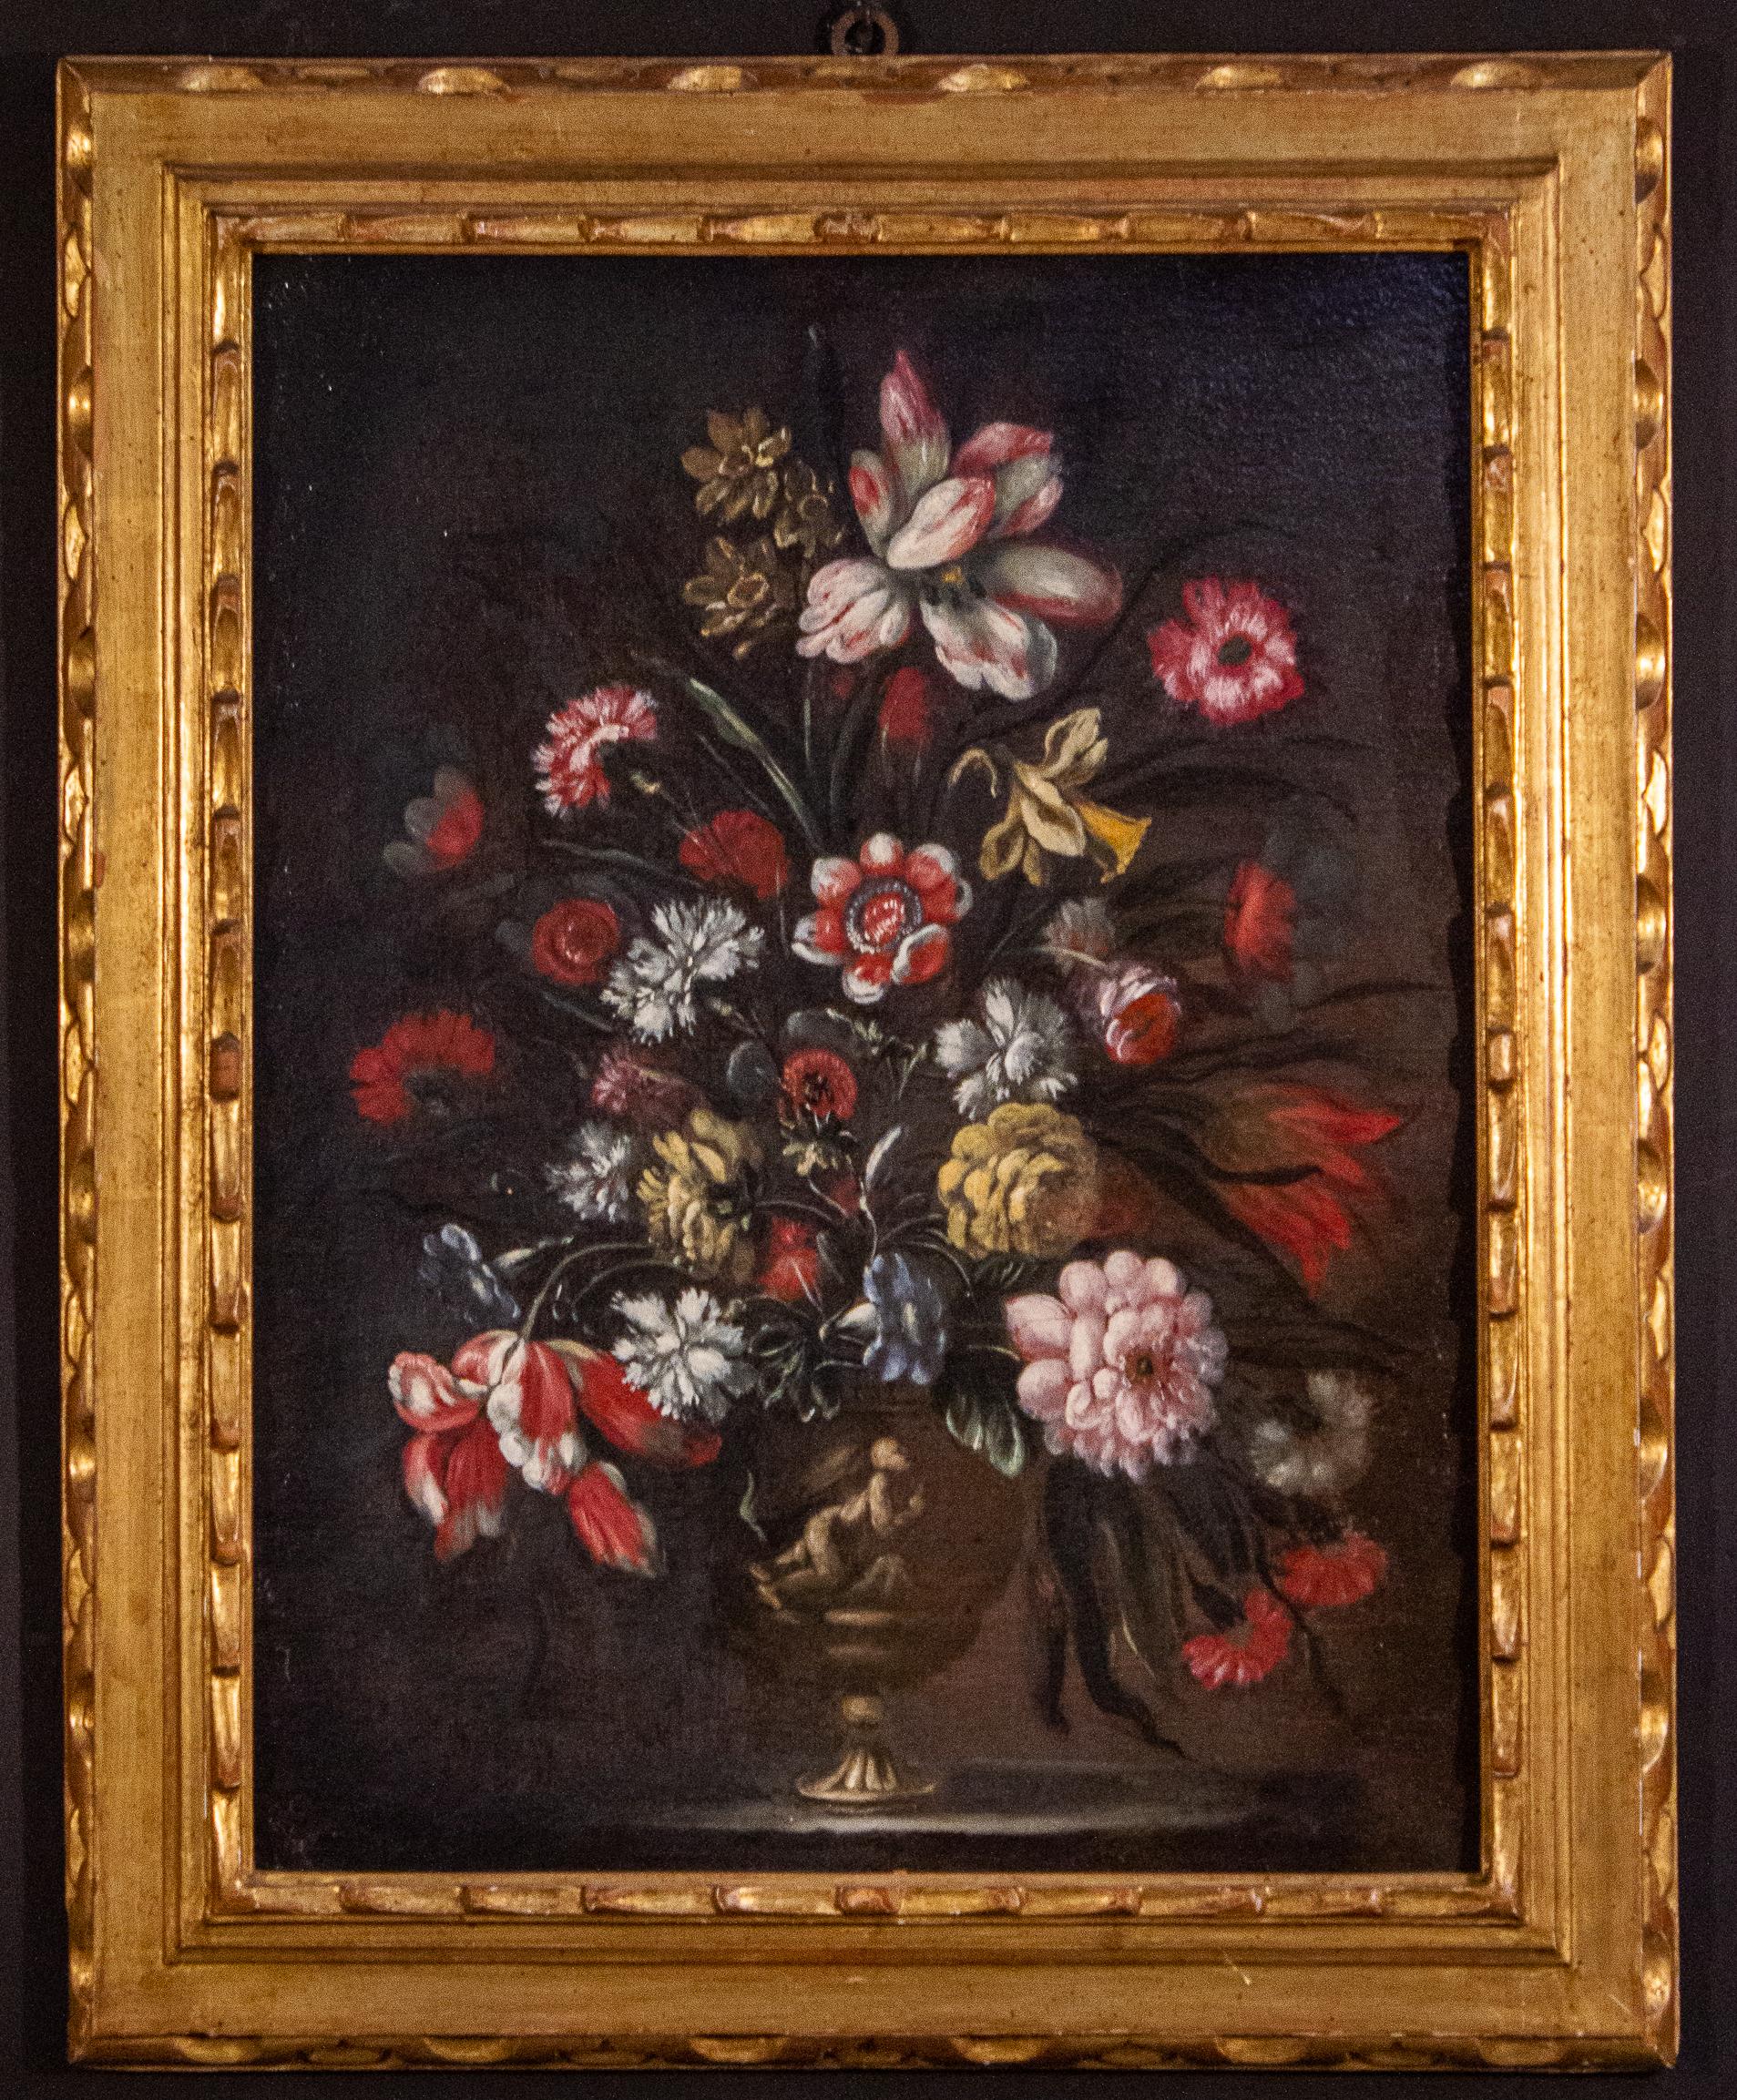 Pair of 18th century Italian Still Life Paintings of Flowers   For Sale 1